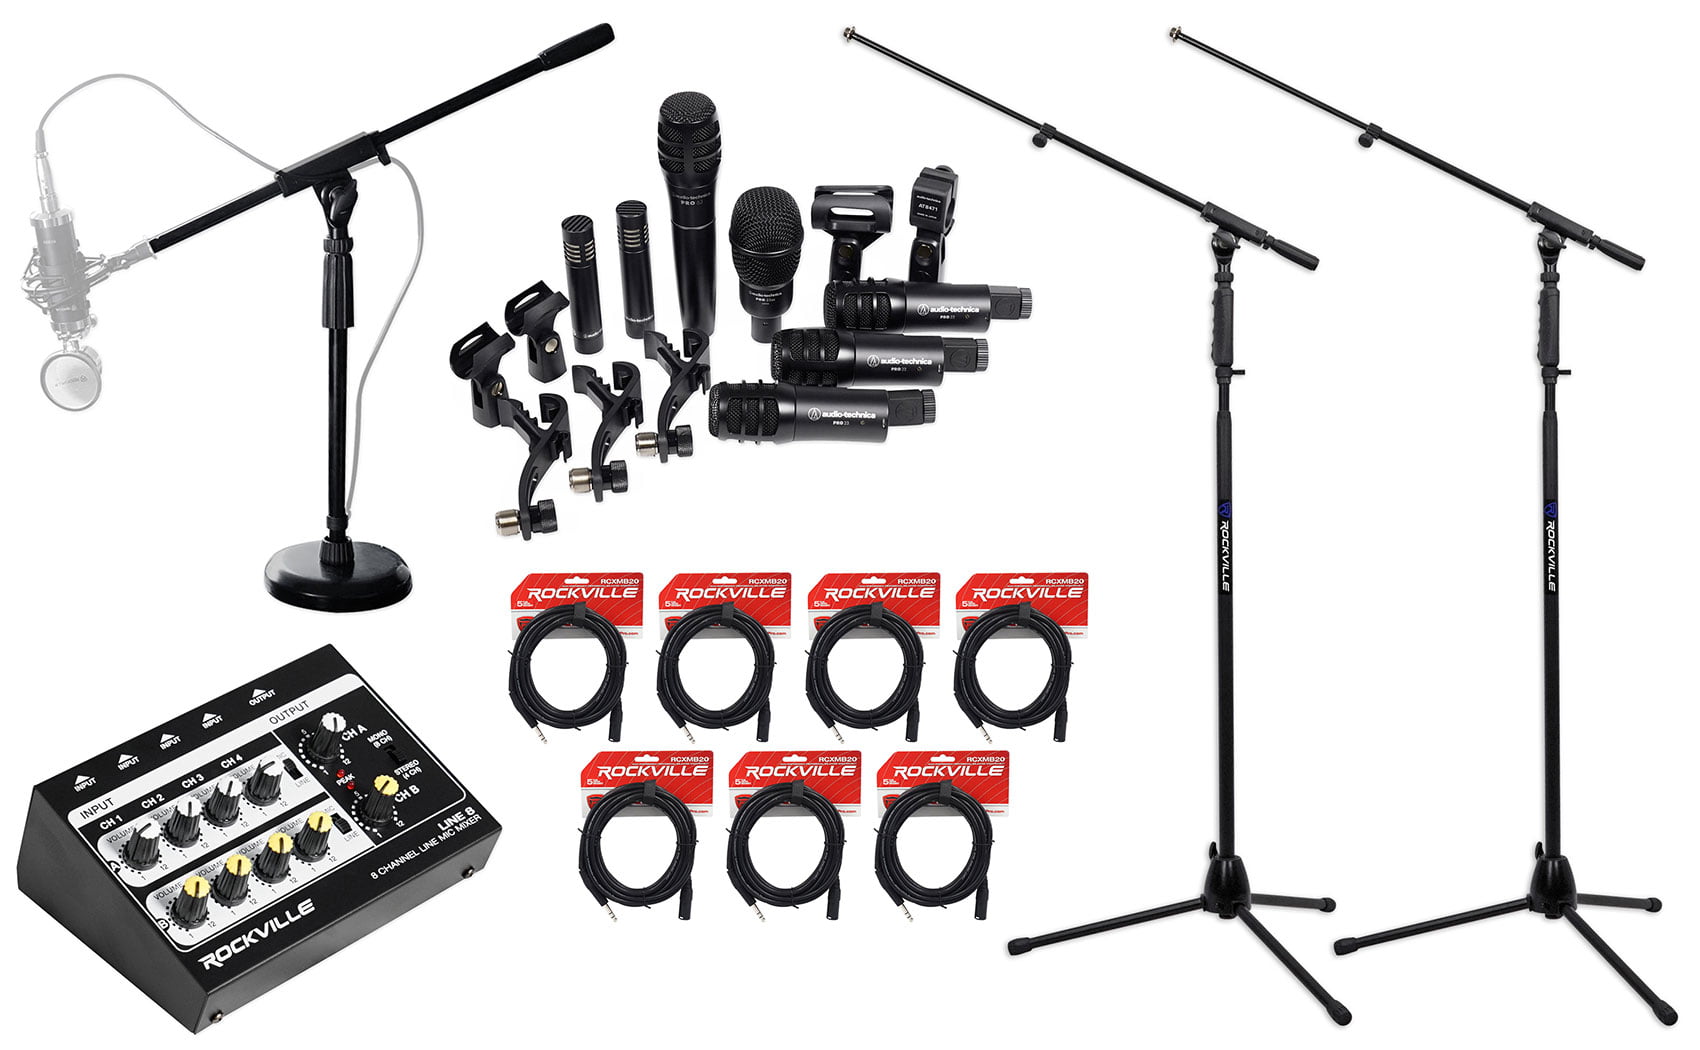 Audio Technica Pro Drum Microphone Kit 7 Mics+3 Stands+8-Channel Mixer+Cables 